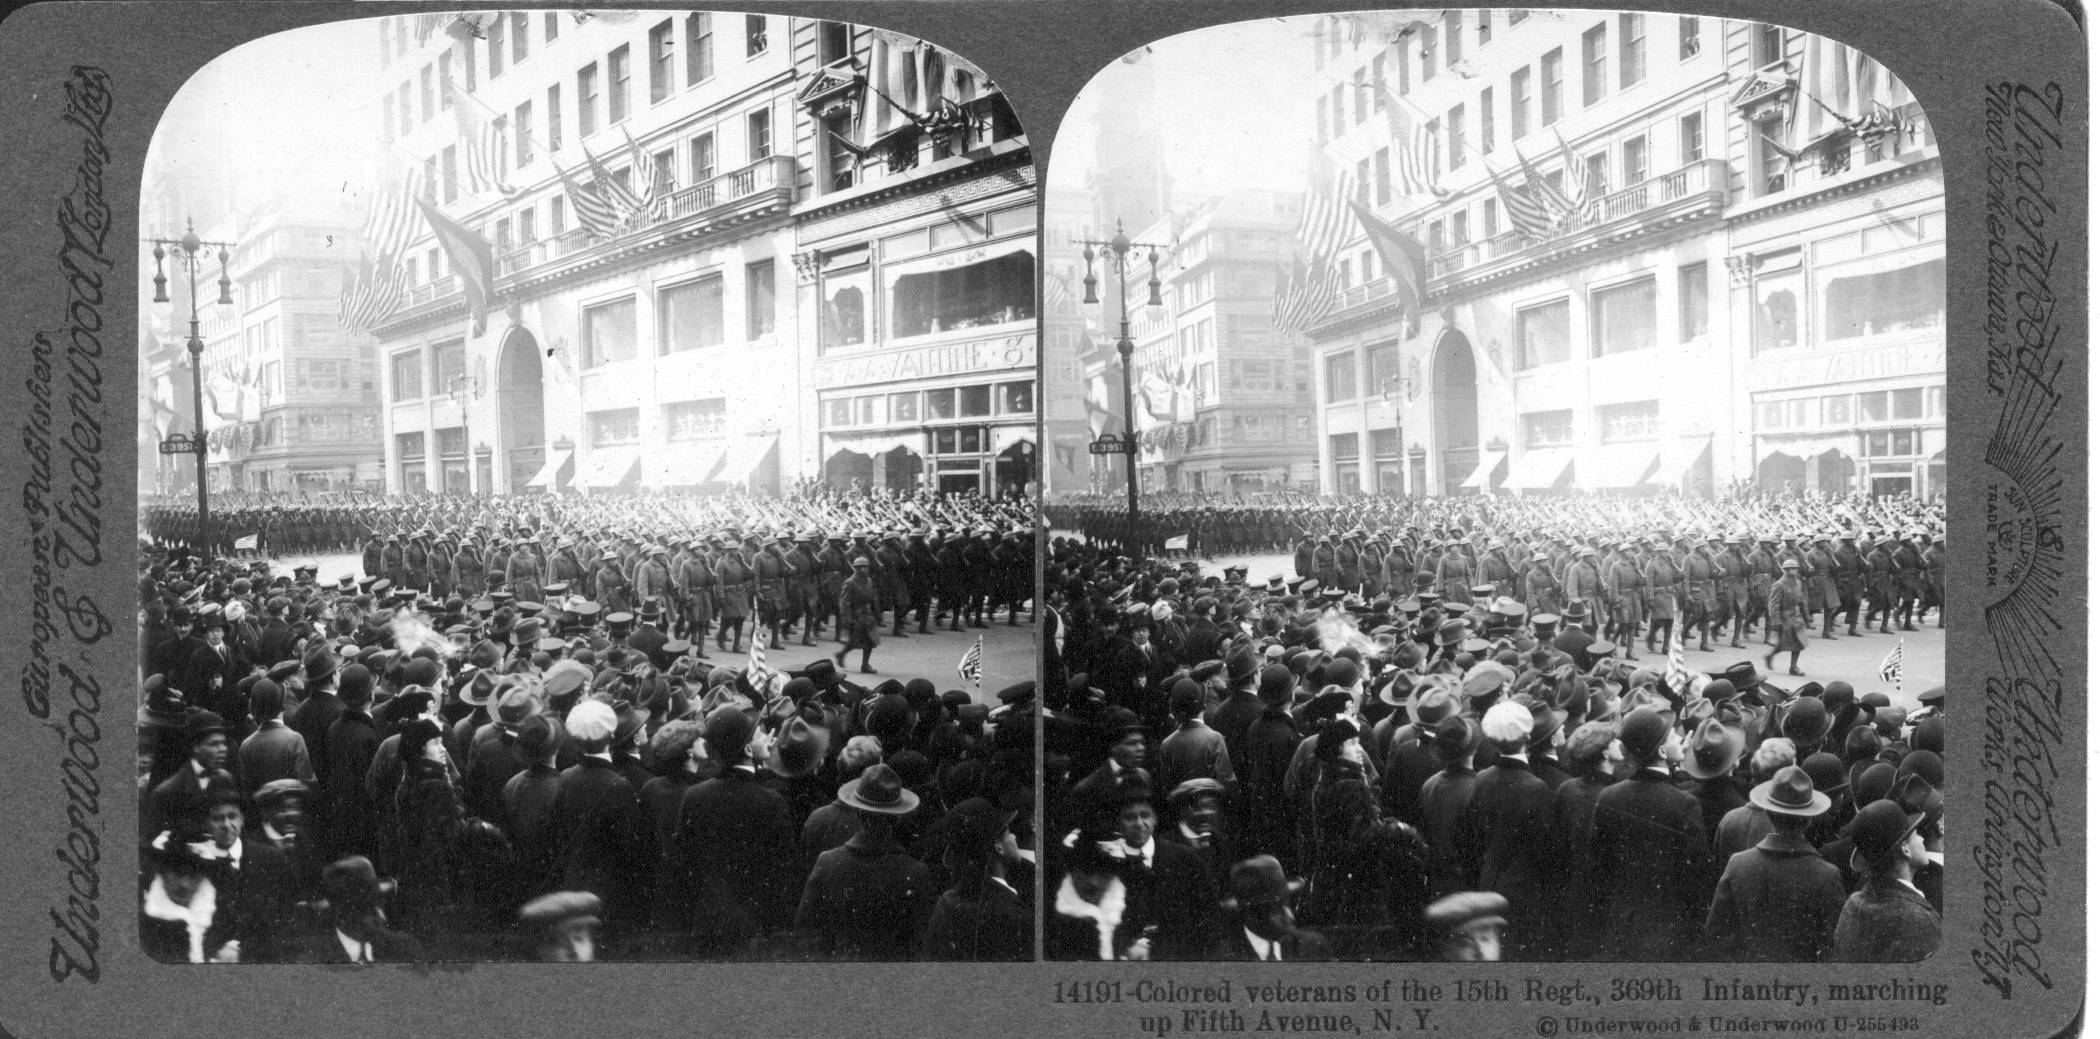 Colored veterans of the 15th Regt., 369th Infantry, marching up Fifth Avenue, N.Y.